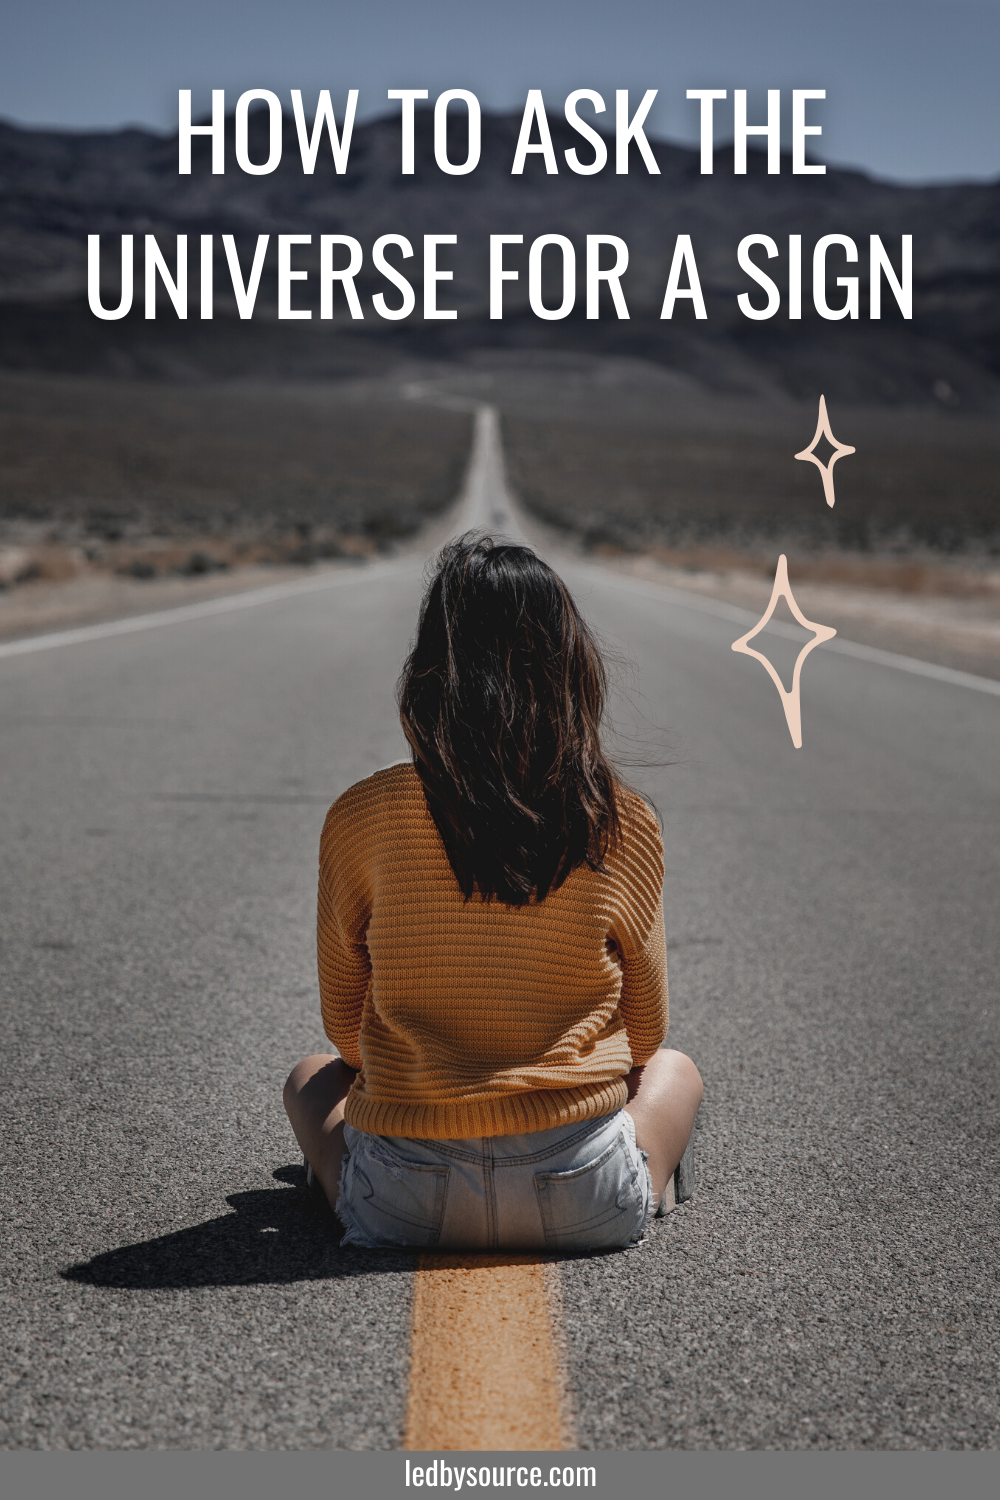 How To Ask The Universe For A Sign Ledbysource